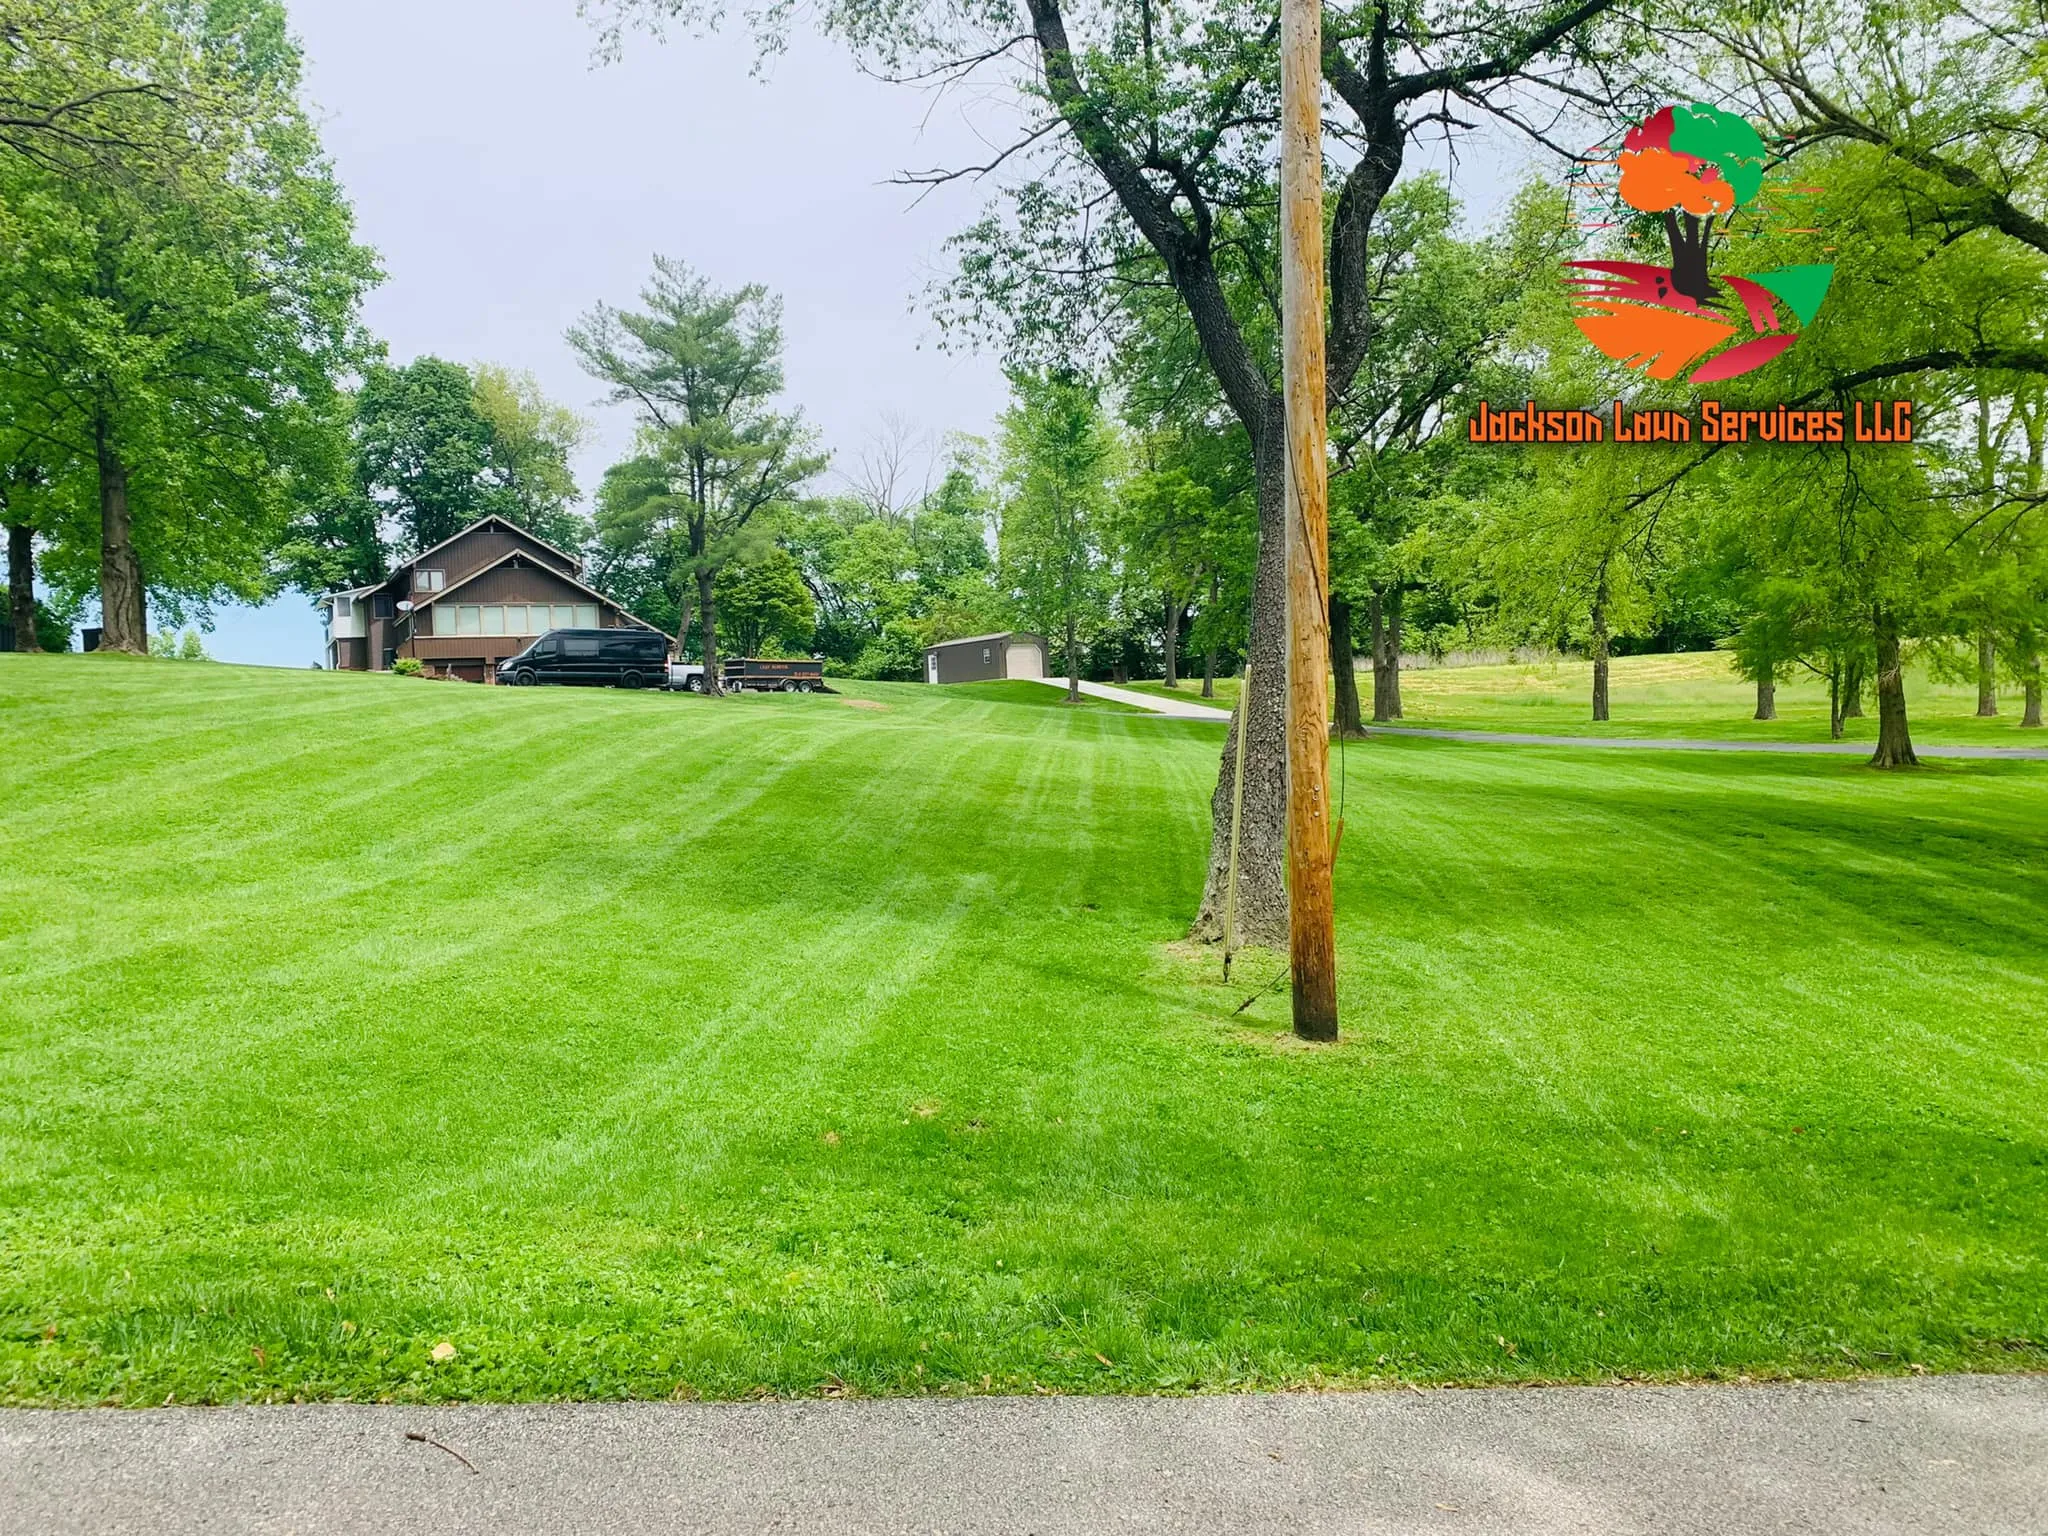 Mowing for Jackson Lawn Services LLC in Florissant , MO